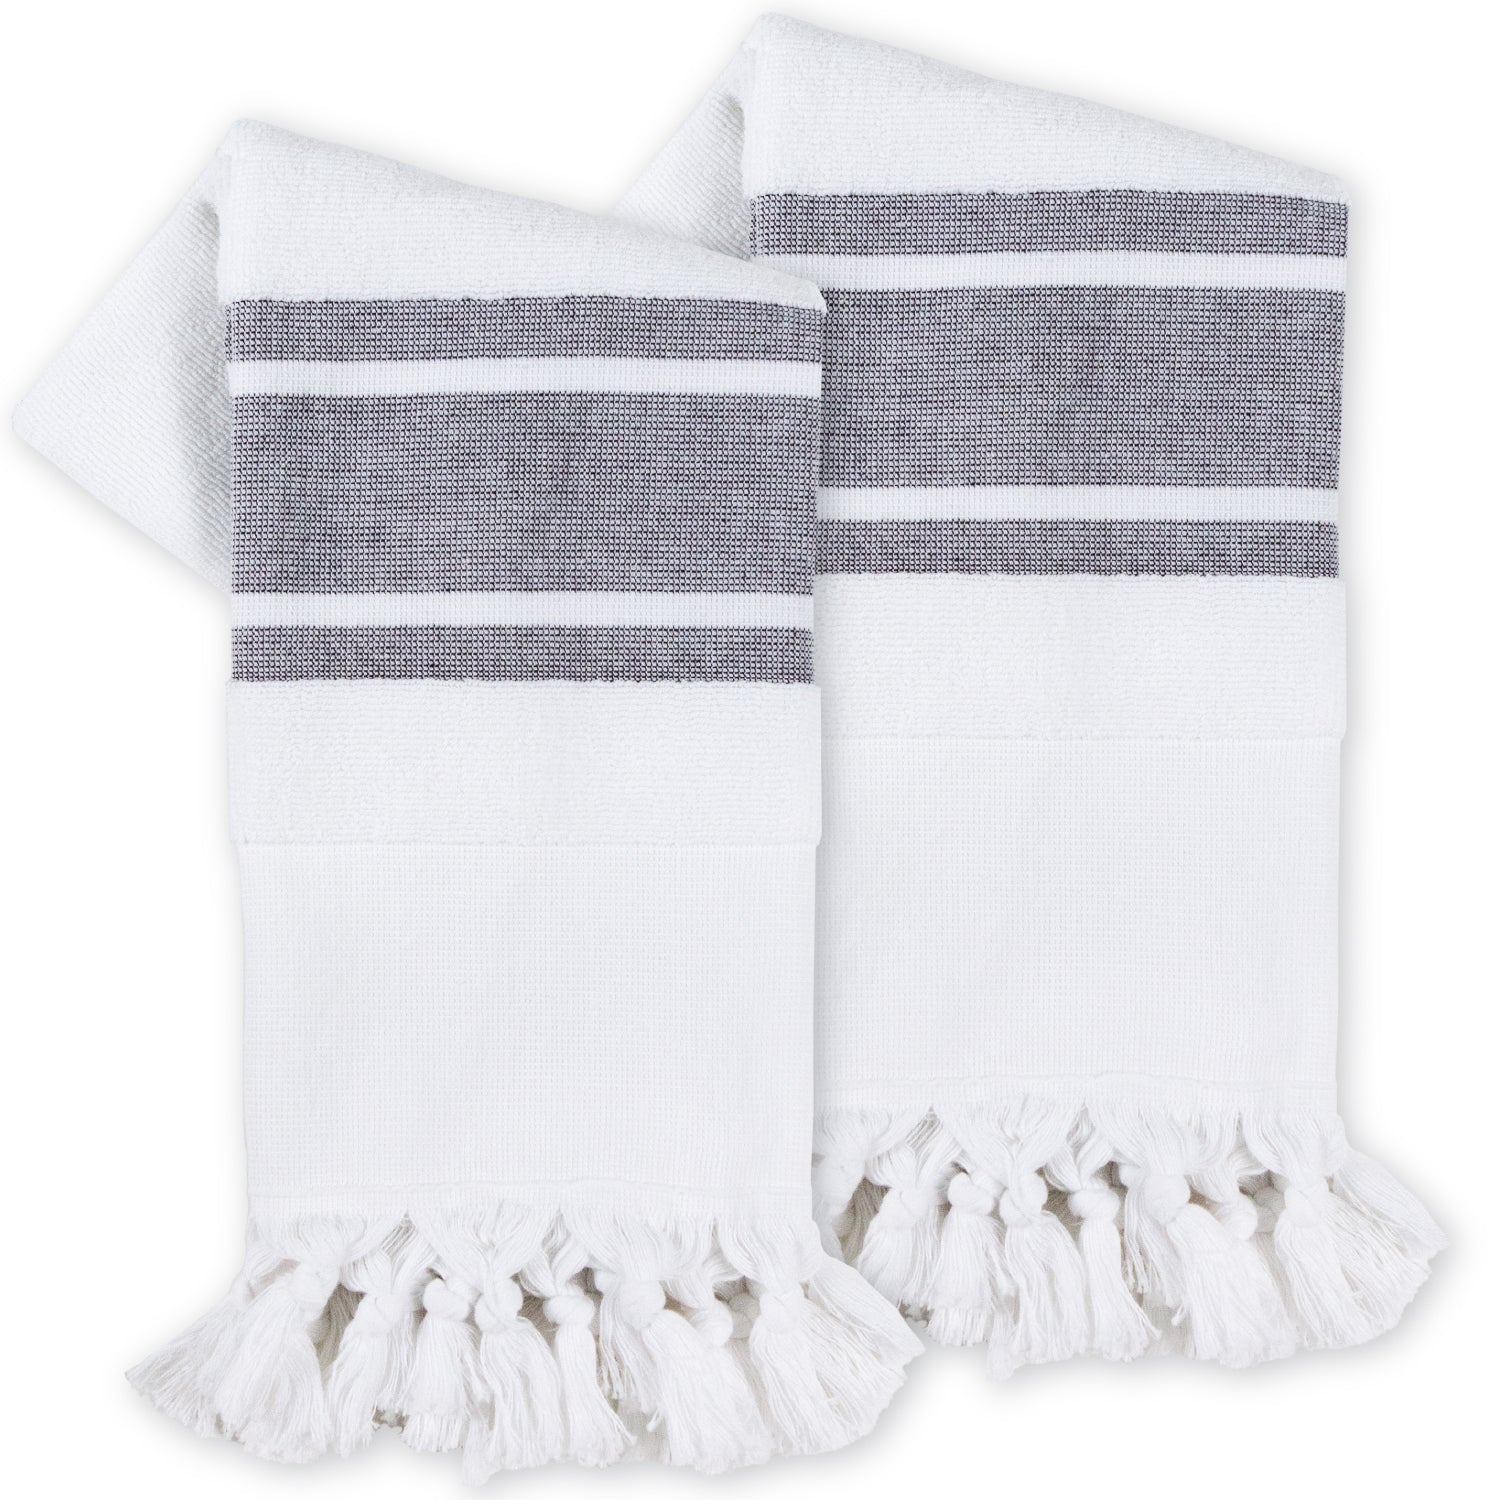 3 Piece Turkish Towel Set for Bathroom, 1 Bath Towel, 2 Hand Towels, Off  White Cotton Bath Towels with Black Stripes,Turkish Peshtemal Towel and Hand  Towels with Fringe